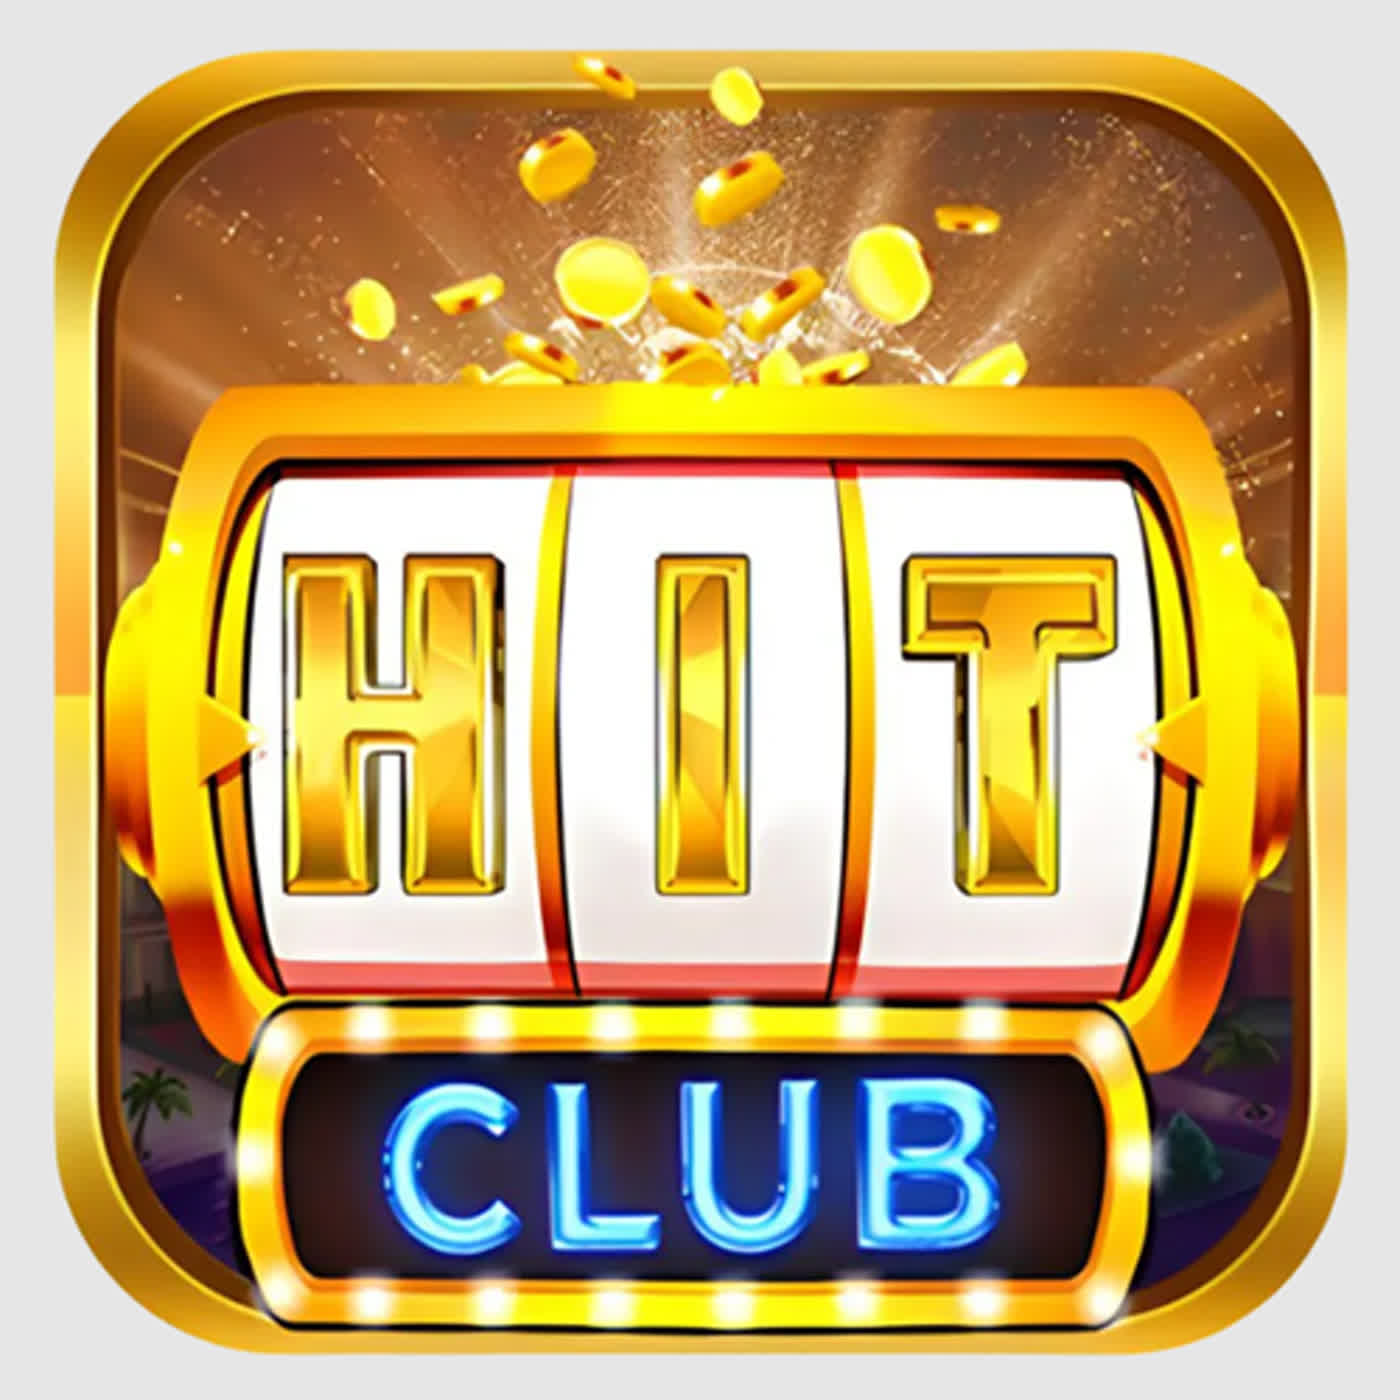 HitClub - Dia Chi Choi Game Ca Cuoc Chat Luong